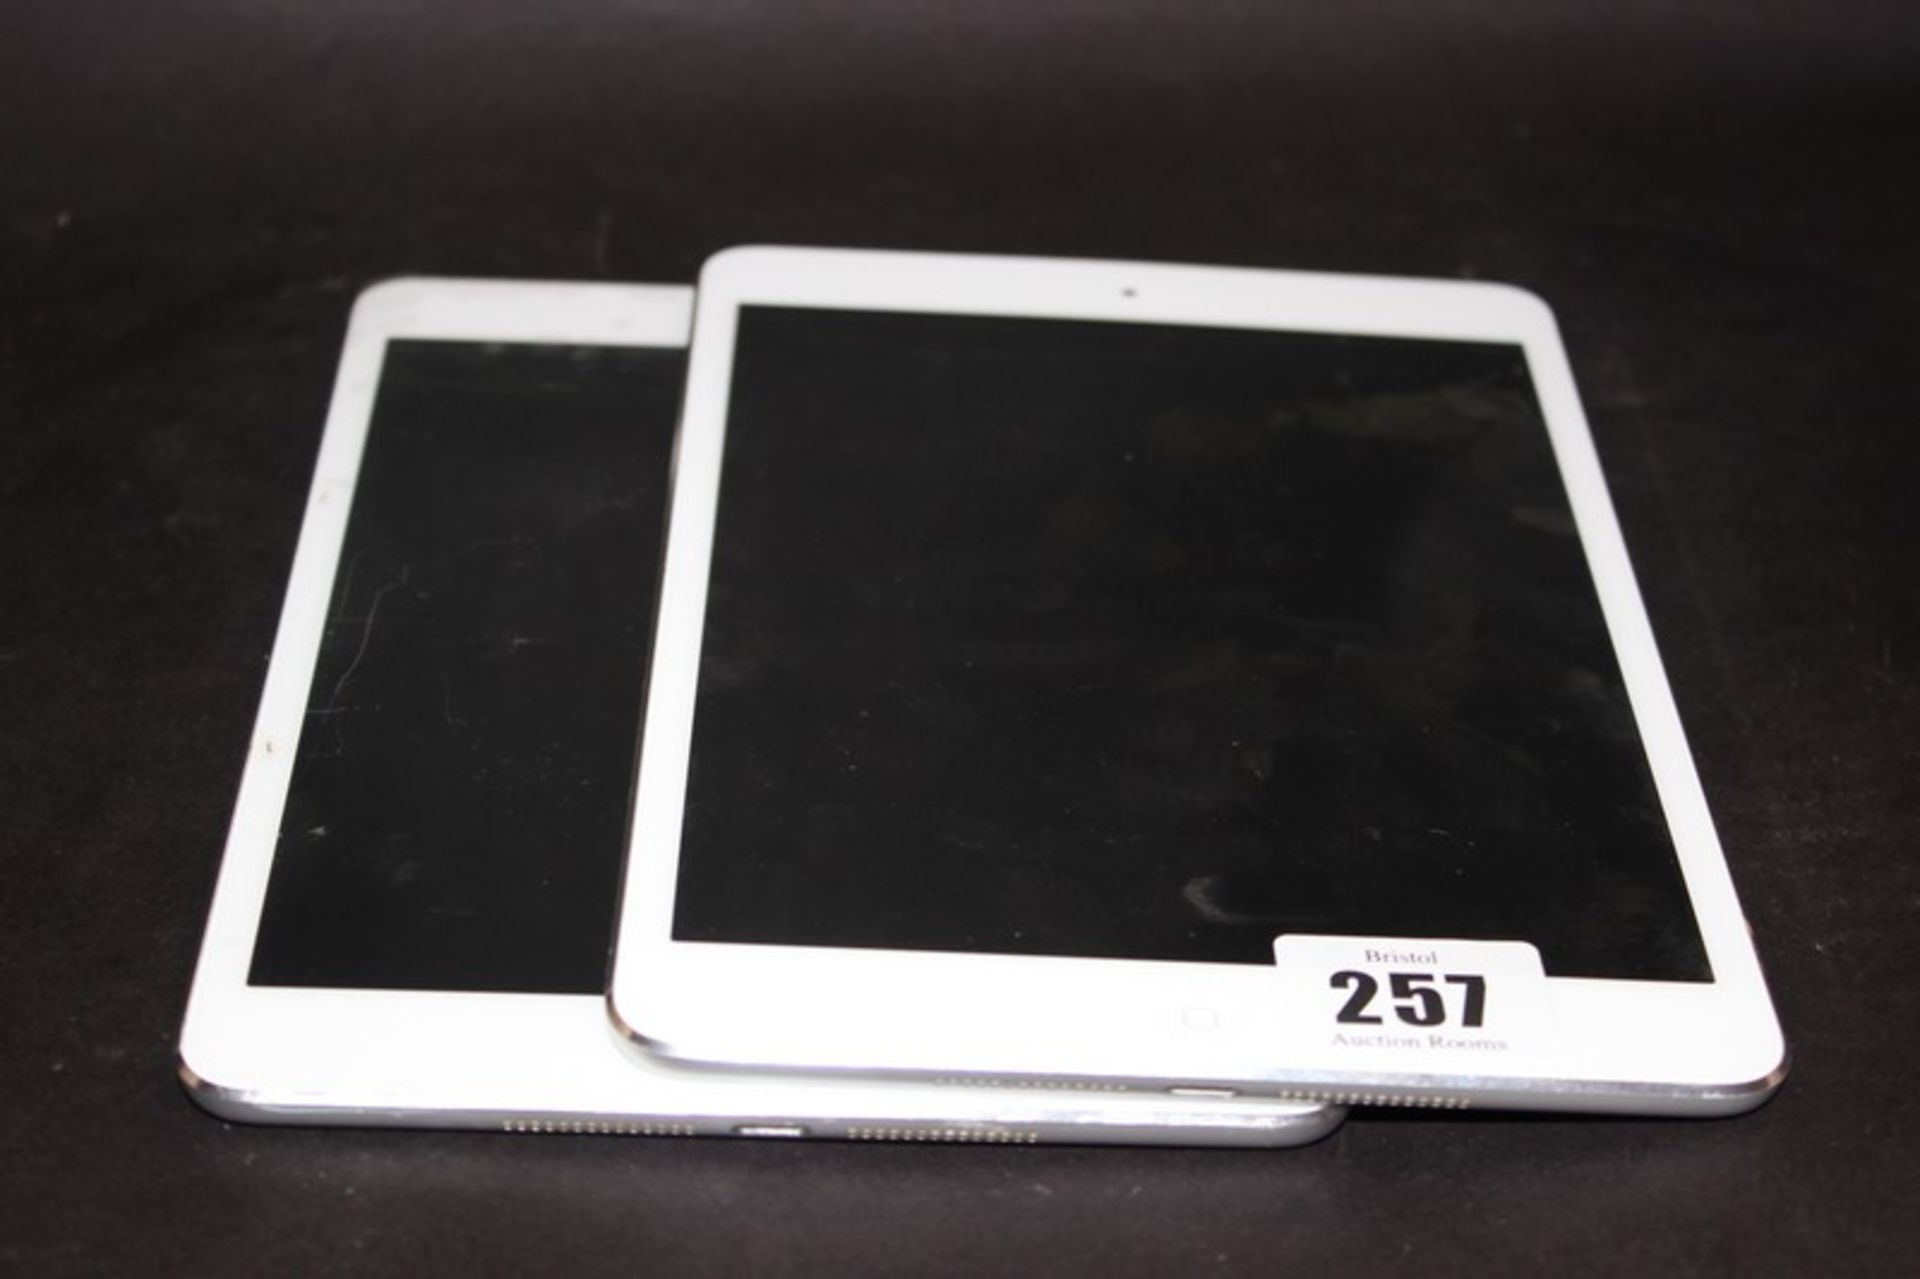 Two iPad Mini A1432 serial: DMQNPDSSF196 and DQVKCHMWF196 (Both activation locked).